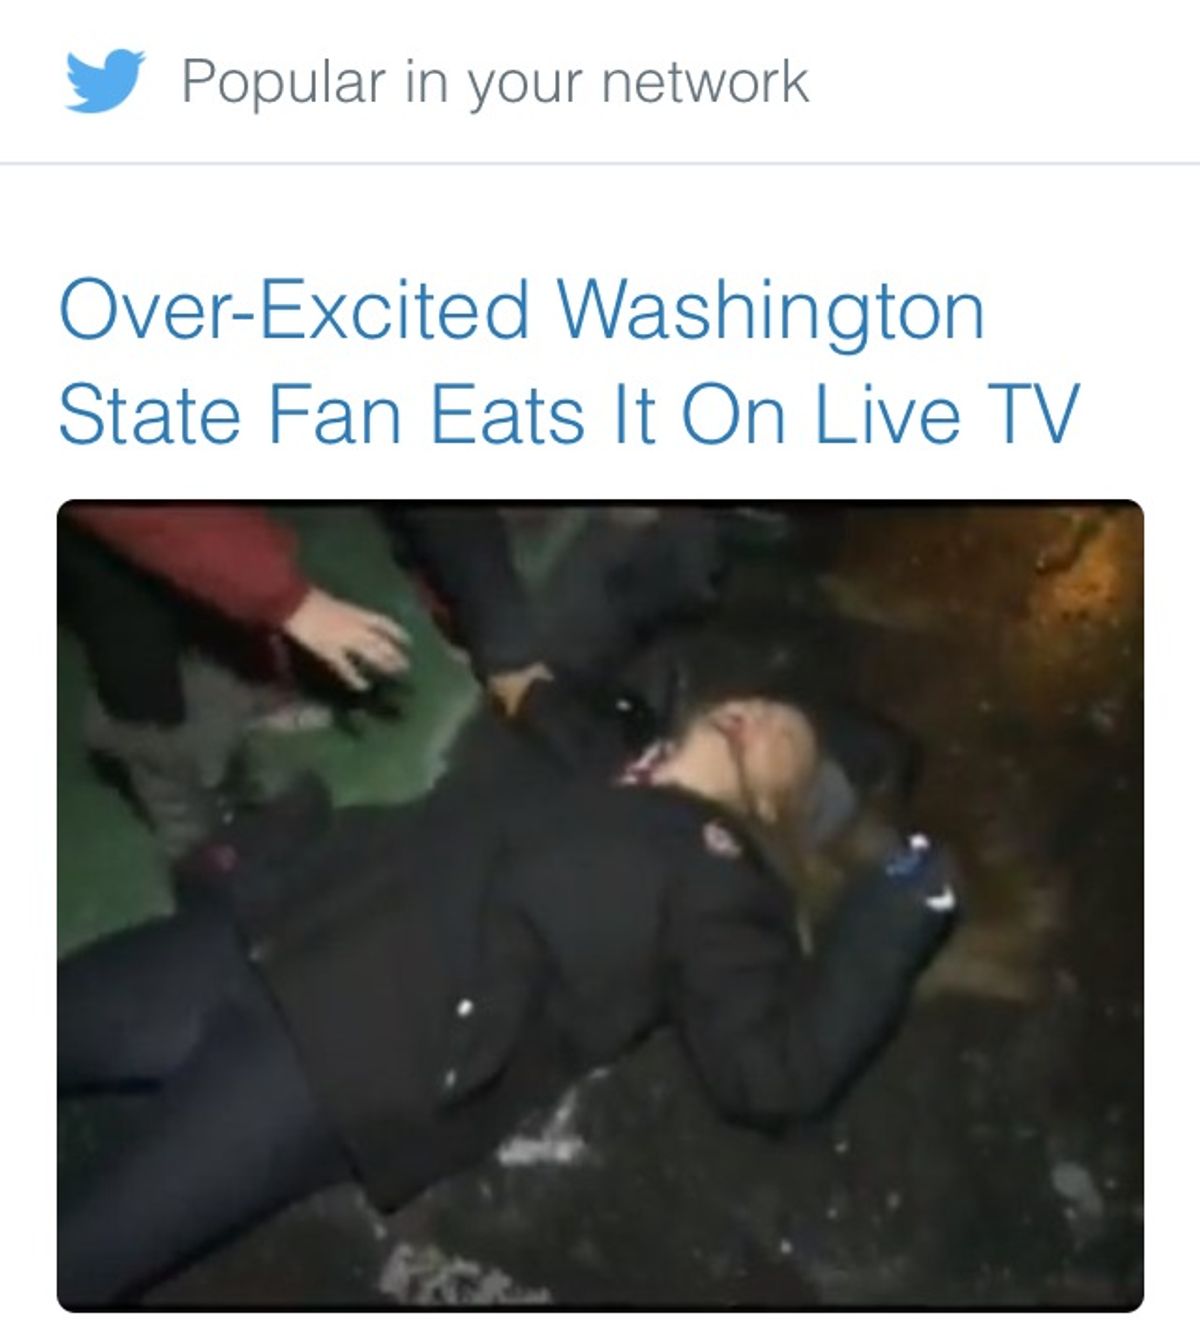 Tweet referencing to a Washington State fan eating ice on live TV